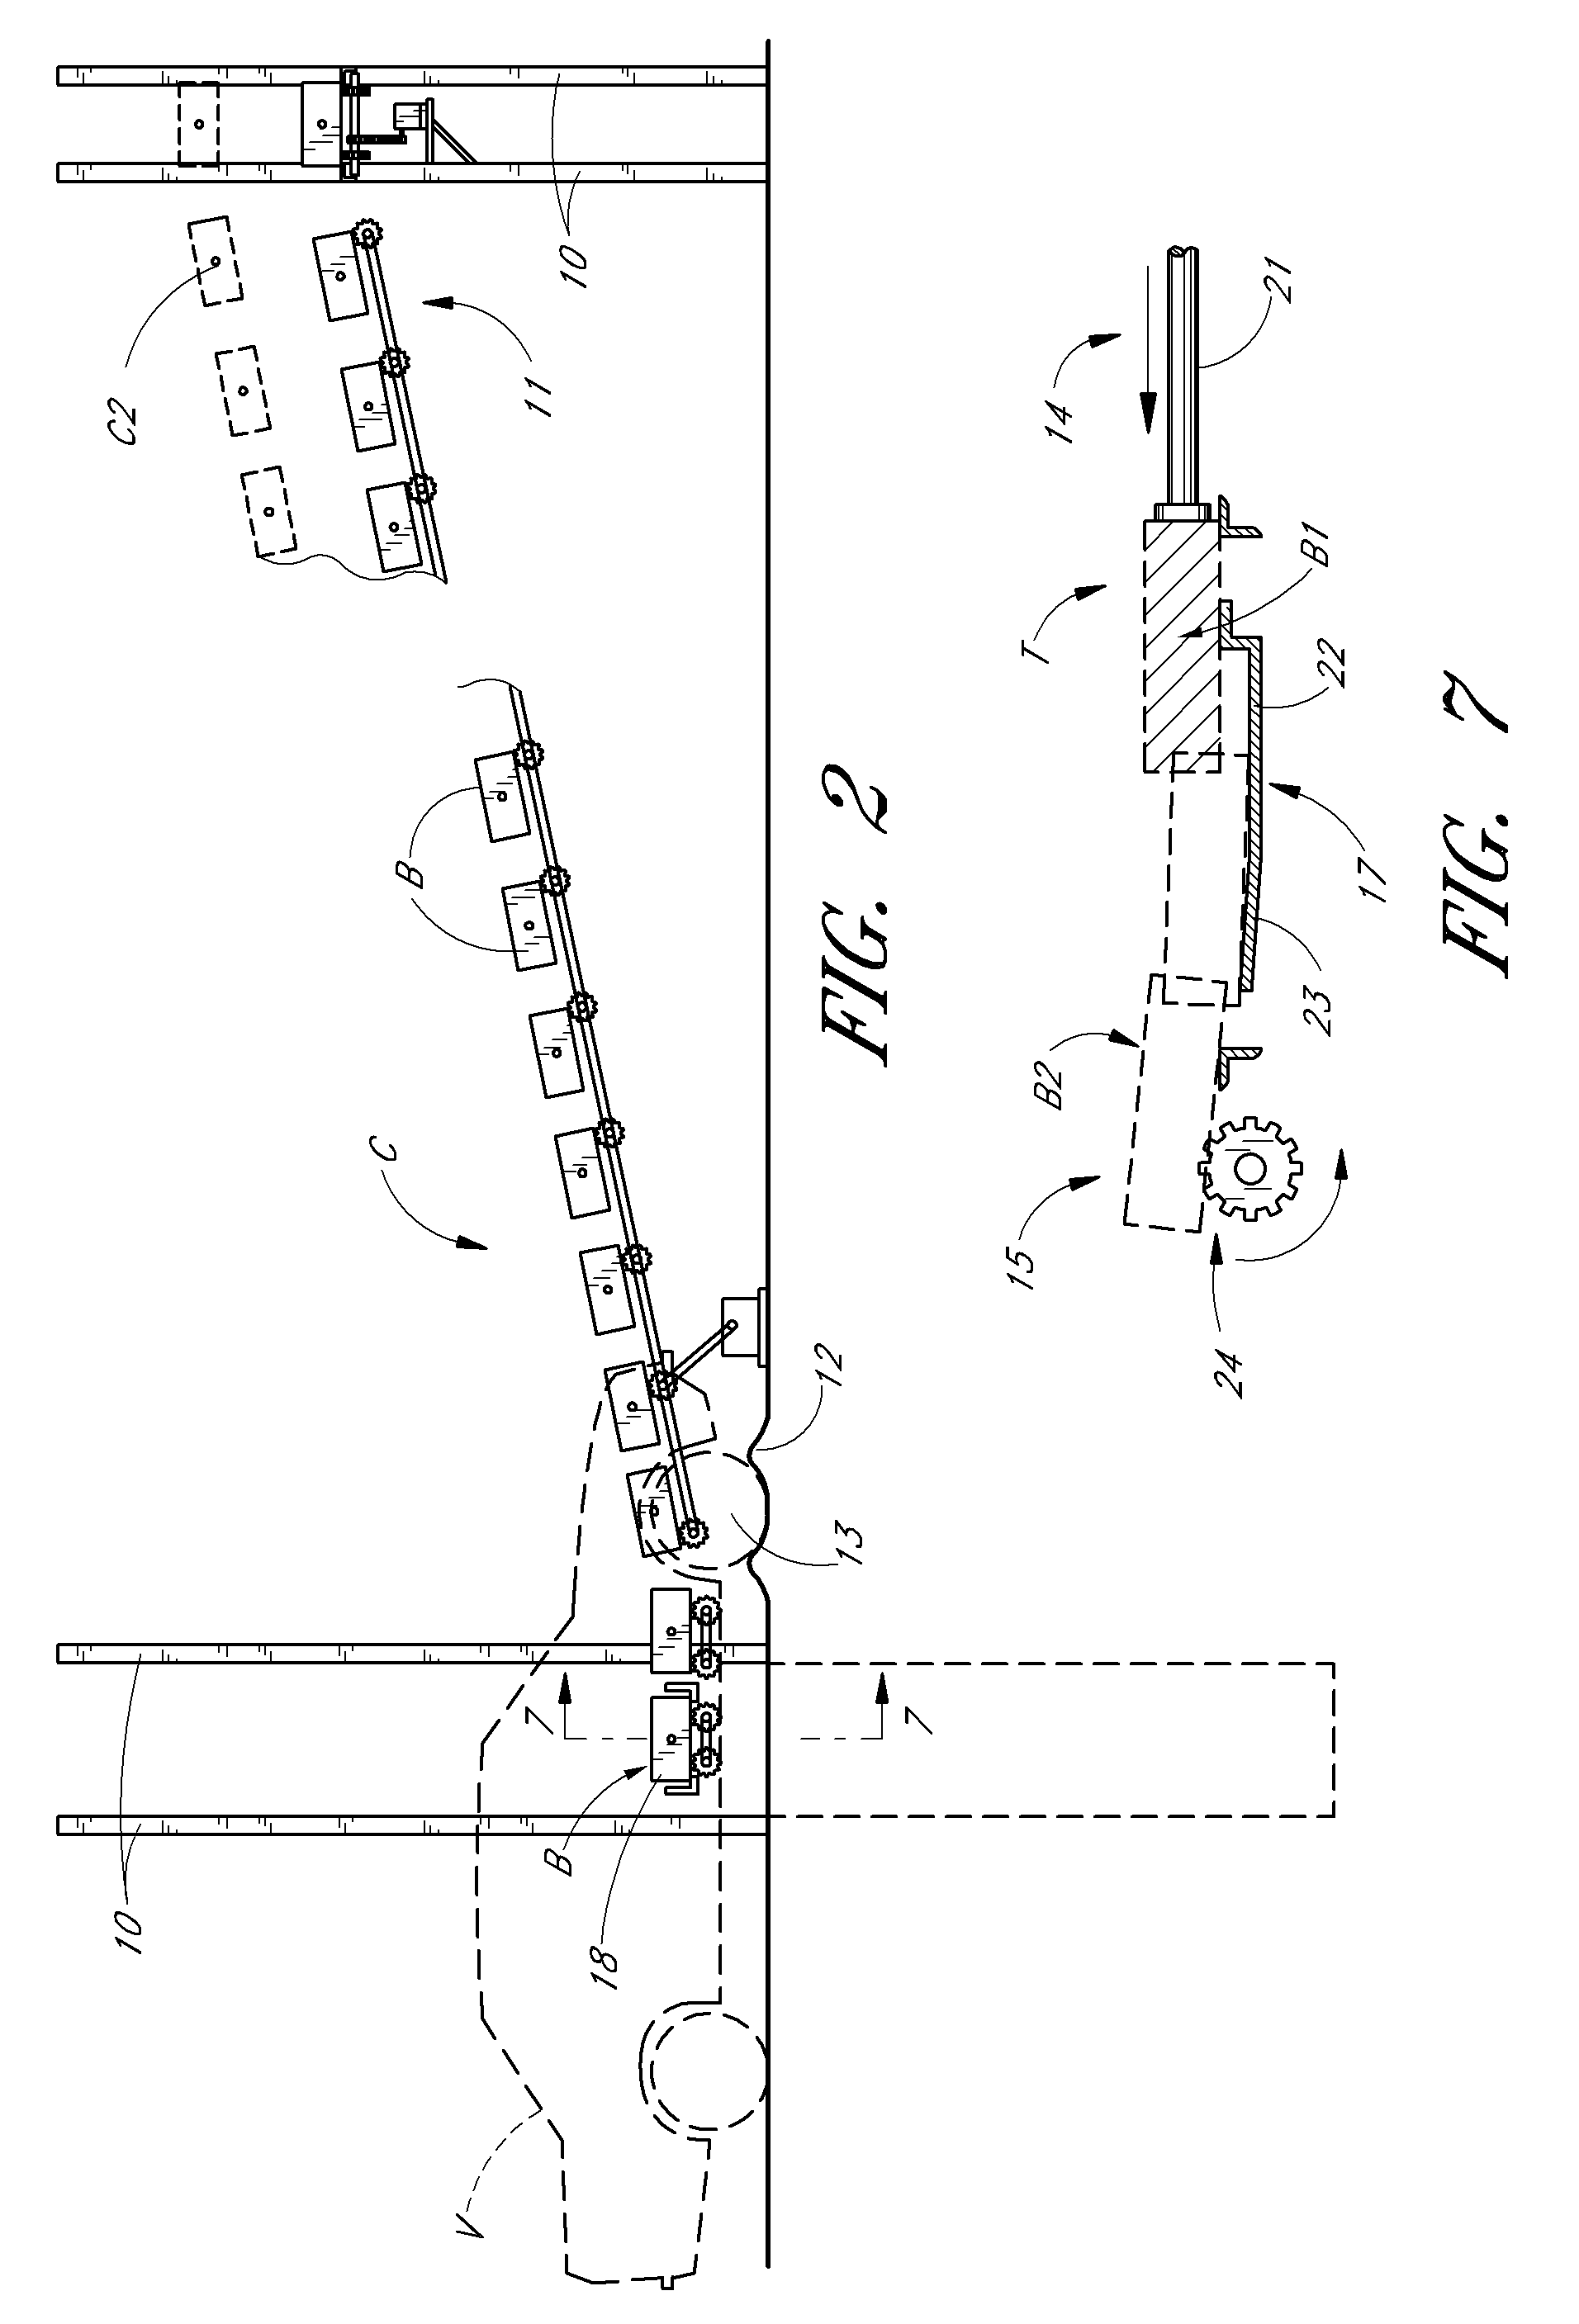 Battery charging and transfer system for electrically powered vehicles